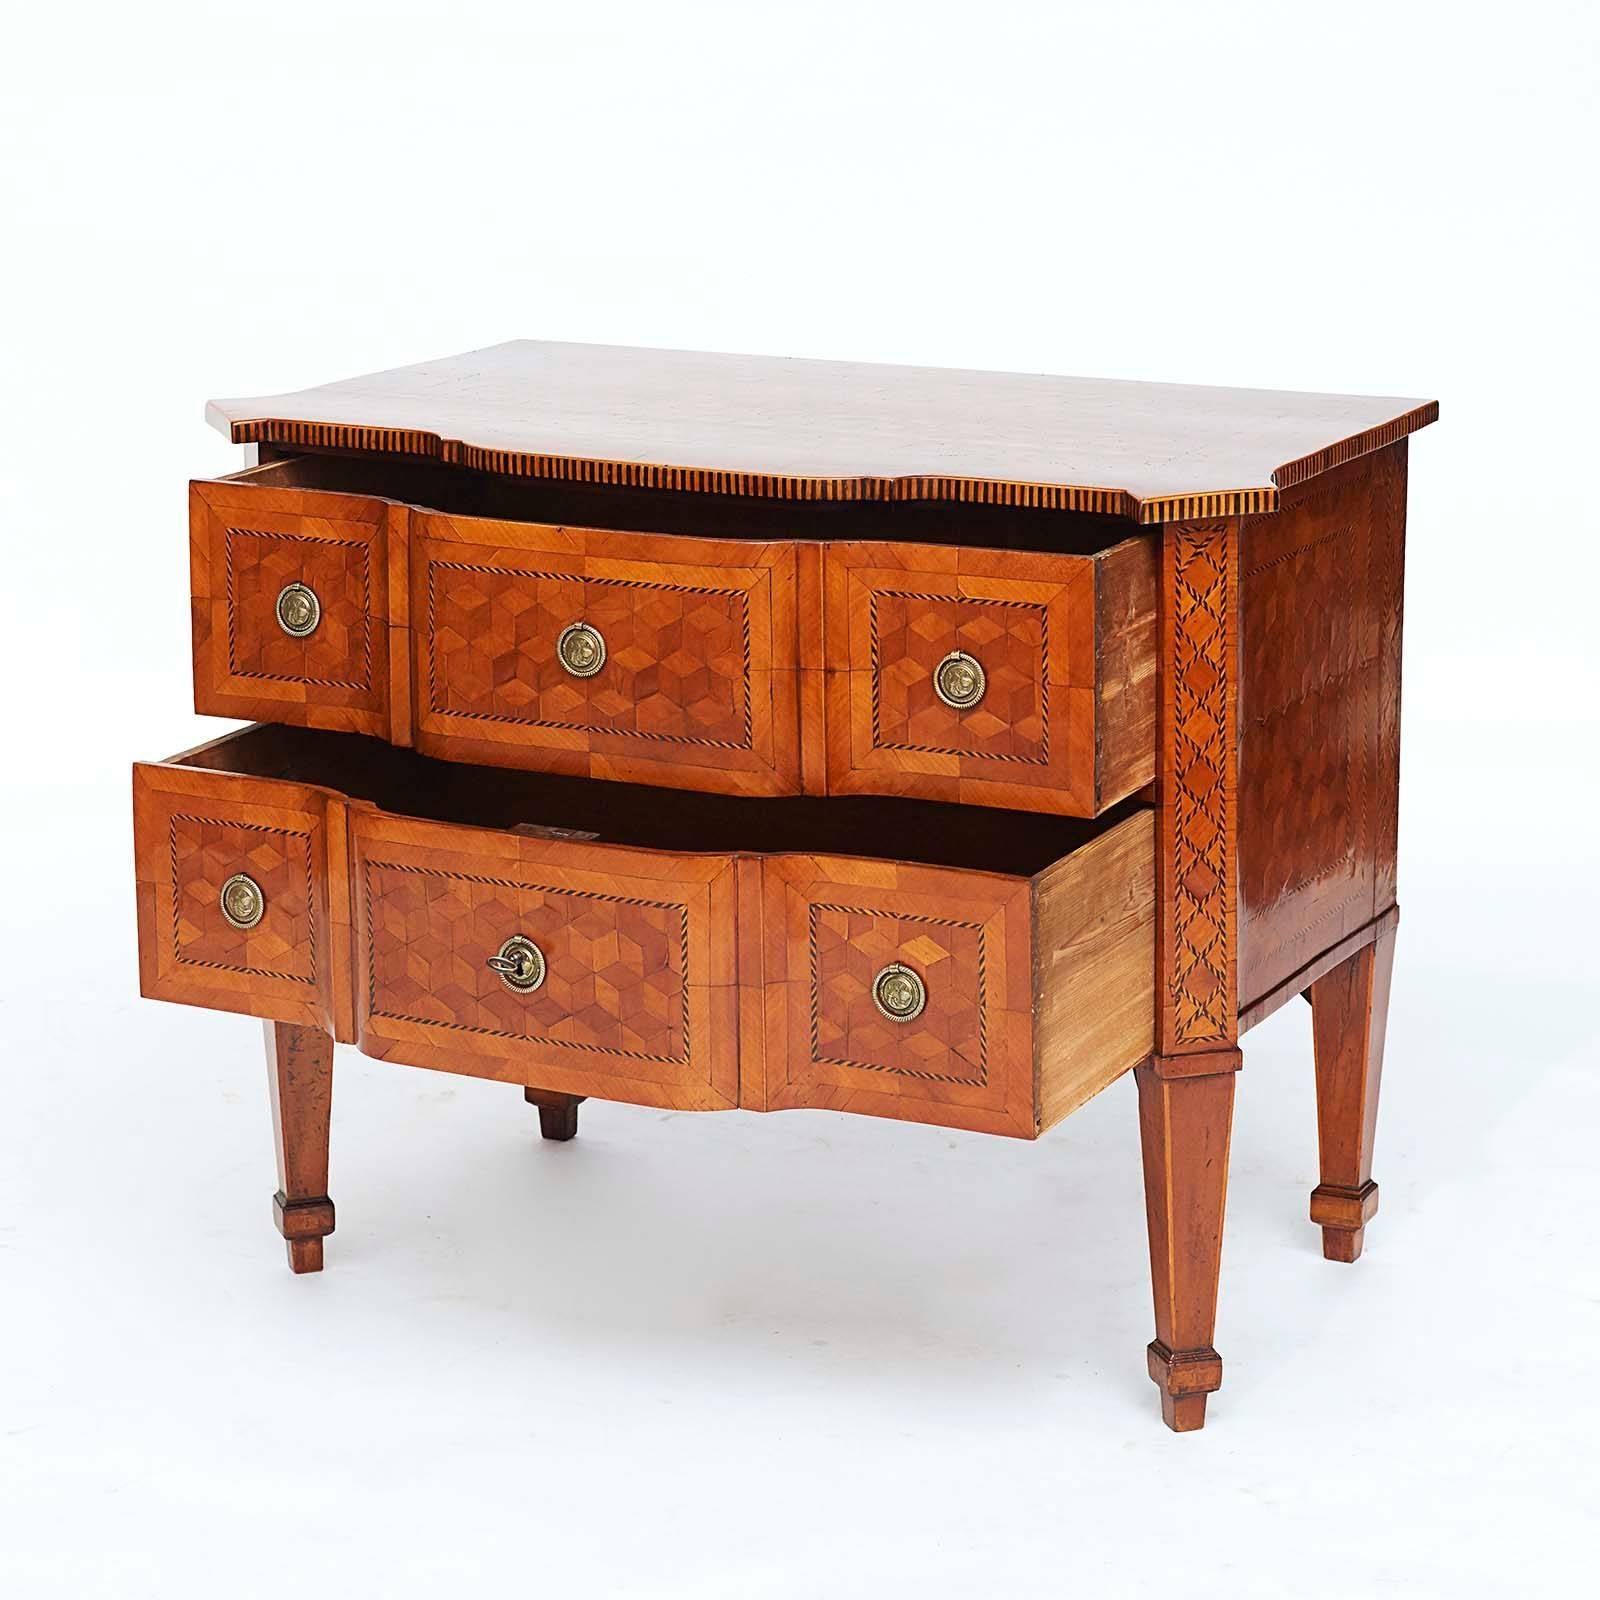 A fine Louis XVI walnut, ebonized and fruitwood parquetry commode, circa 1780, the rectangular top with canted fore-corners and a stepped front, above two stepped long drawers, raised on canted square tapered legs.

   